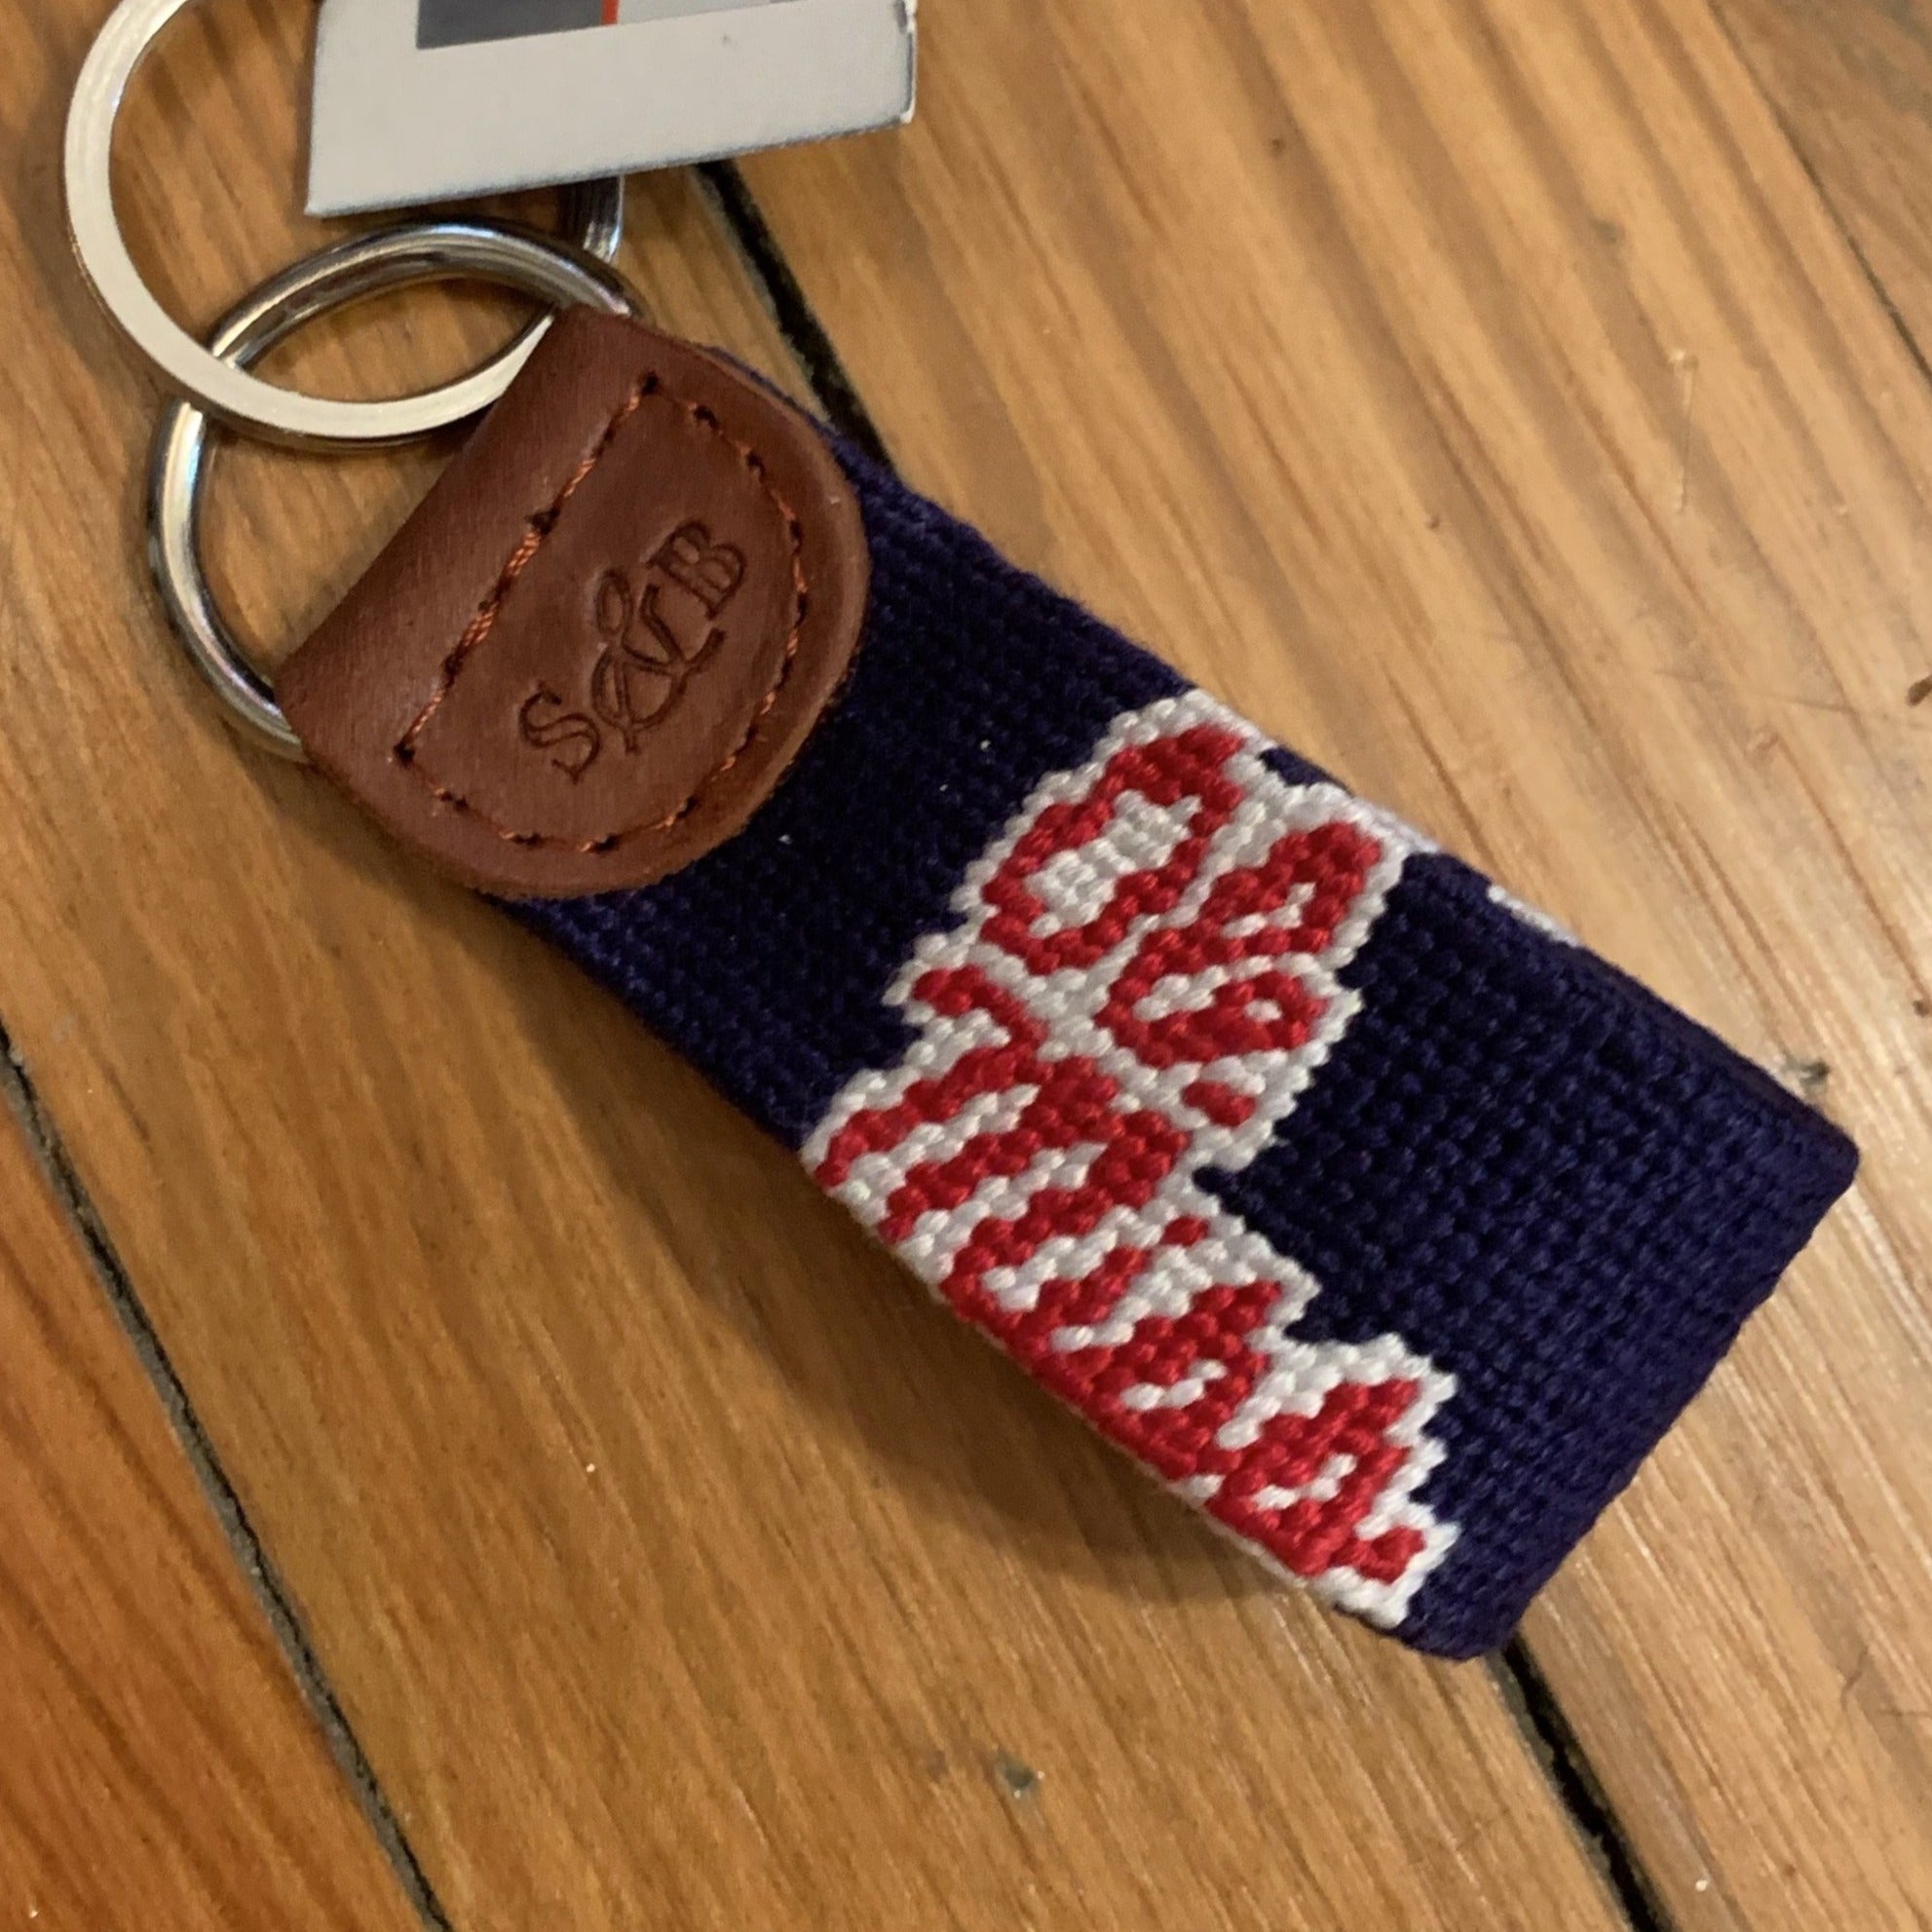 Ole Miss Smathers and Branson key chain